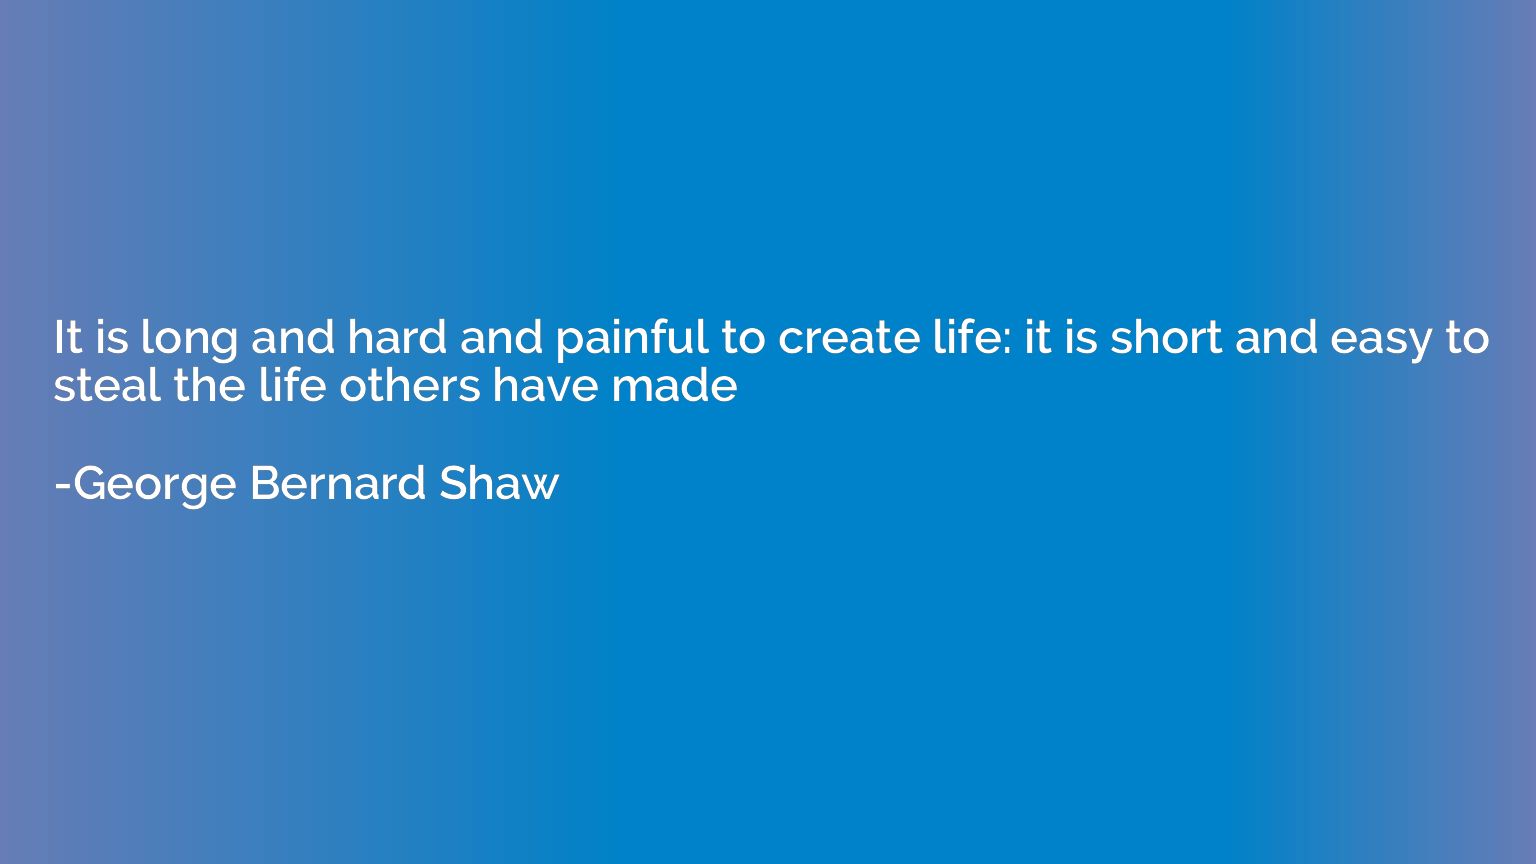 It is long and hard and painful to create life: it is short 